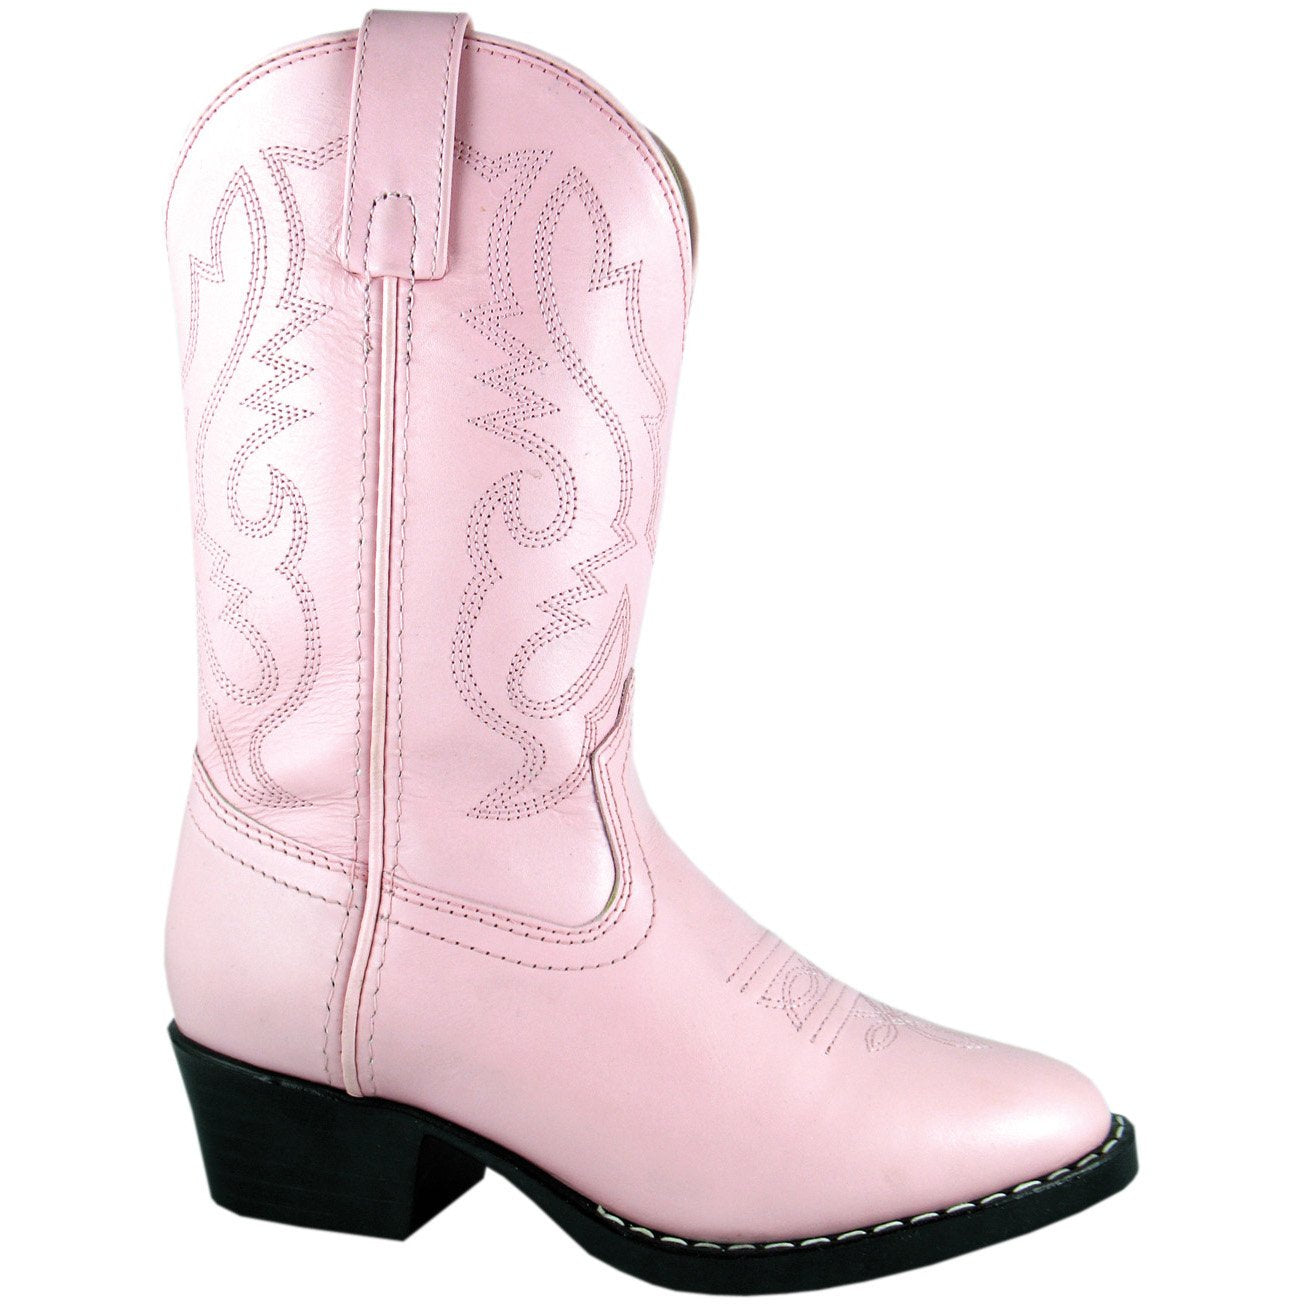 Smoky Mountain Girl's Youth Pink Western